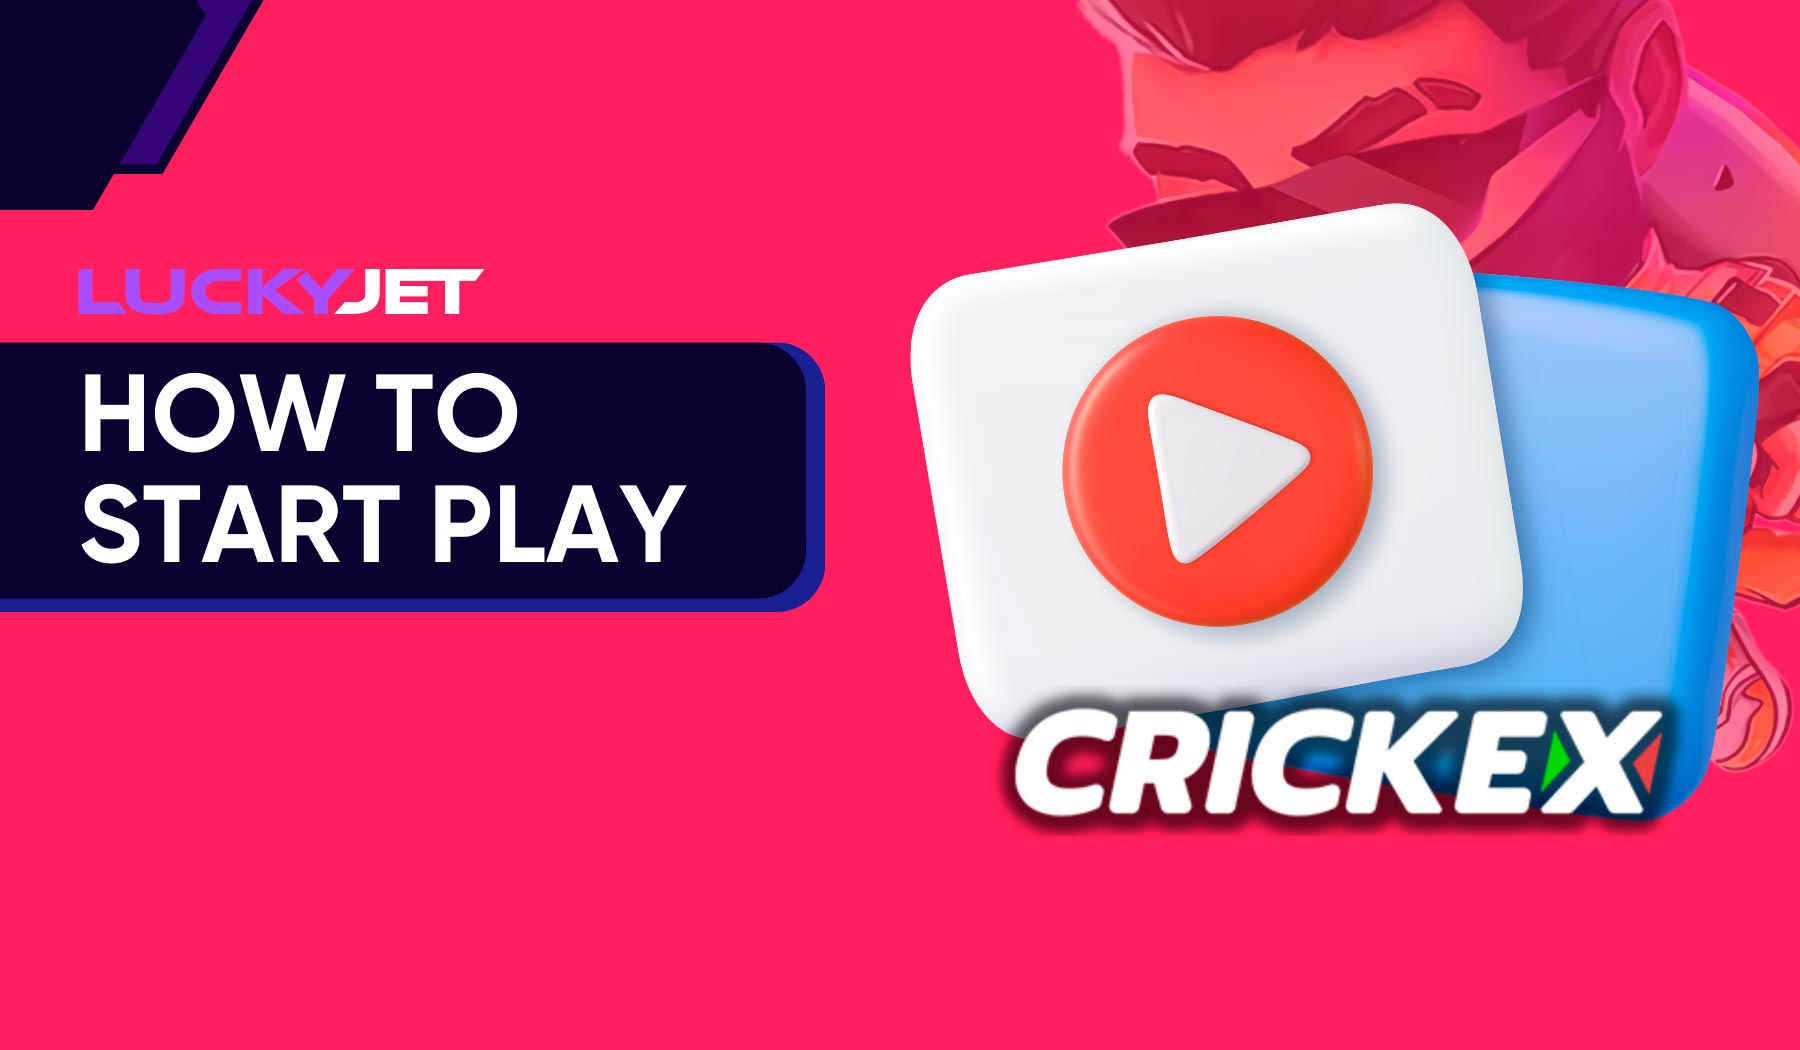 Getting started playing Lucky Jet on Crickex